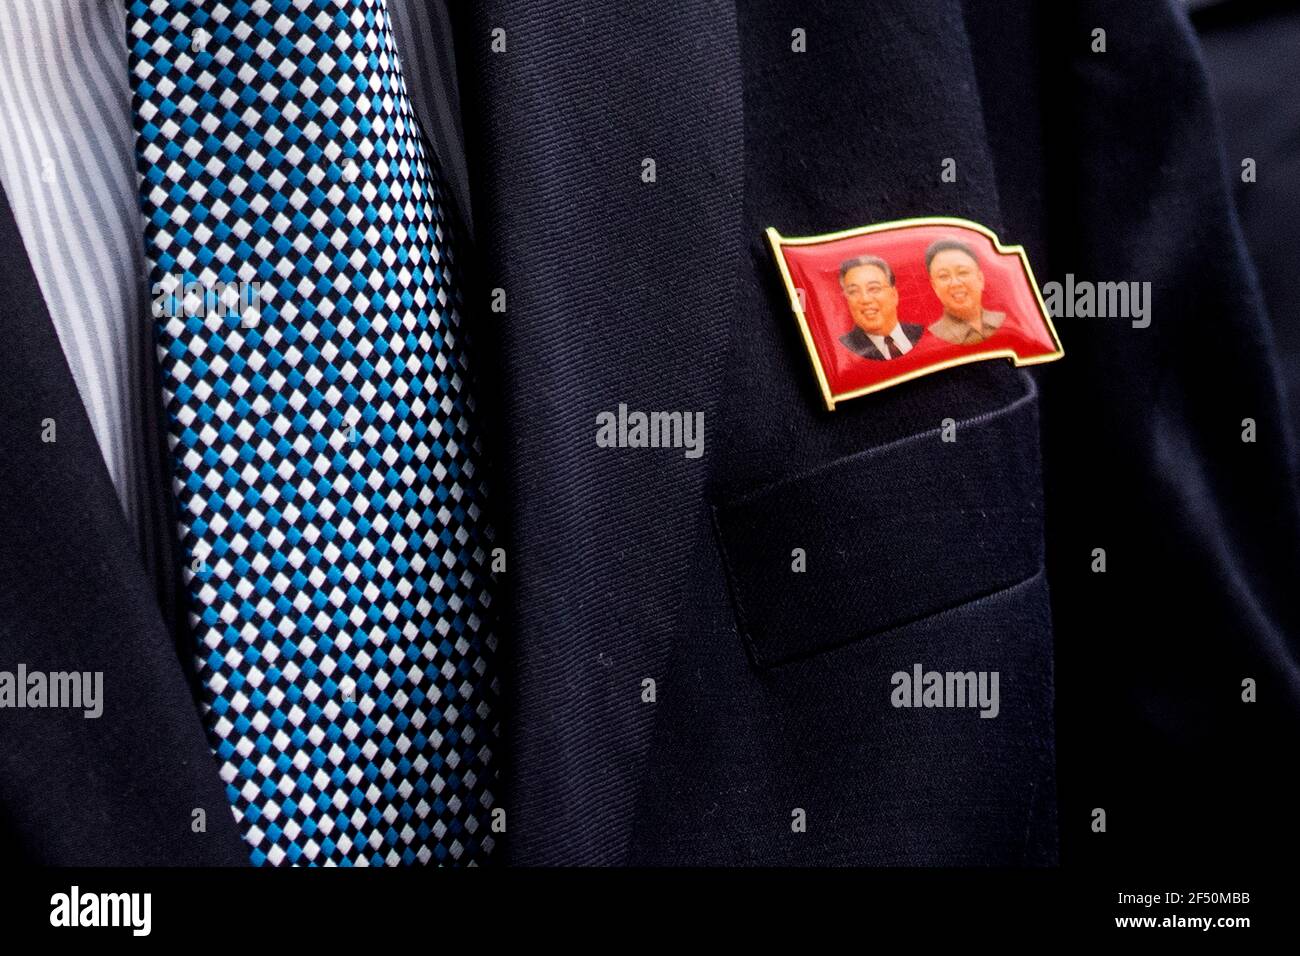 A badge worn by Kim Yu-song, North Korean counsellor depicting former leaders Kim Il Sung and Kim Jong Il seen outside the embassy in Kuala Lumpur.North Korean staff left the country's embassy in Bukit Damansara, Malaysia after Pyongyang cut diplomatic ties with Kuala Lumpur for extraditing a DPRK national to the U.S. Stock Photo